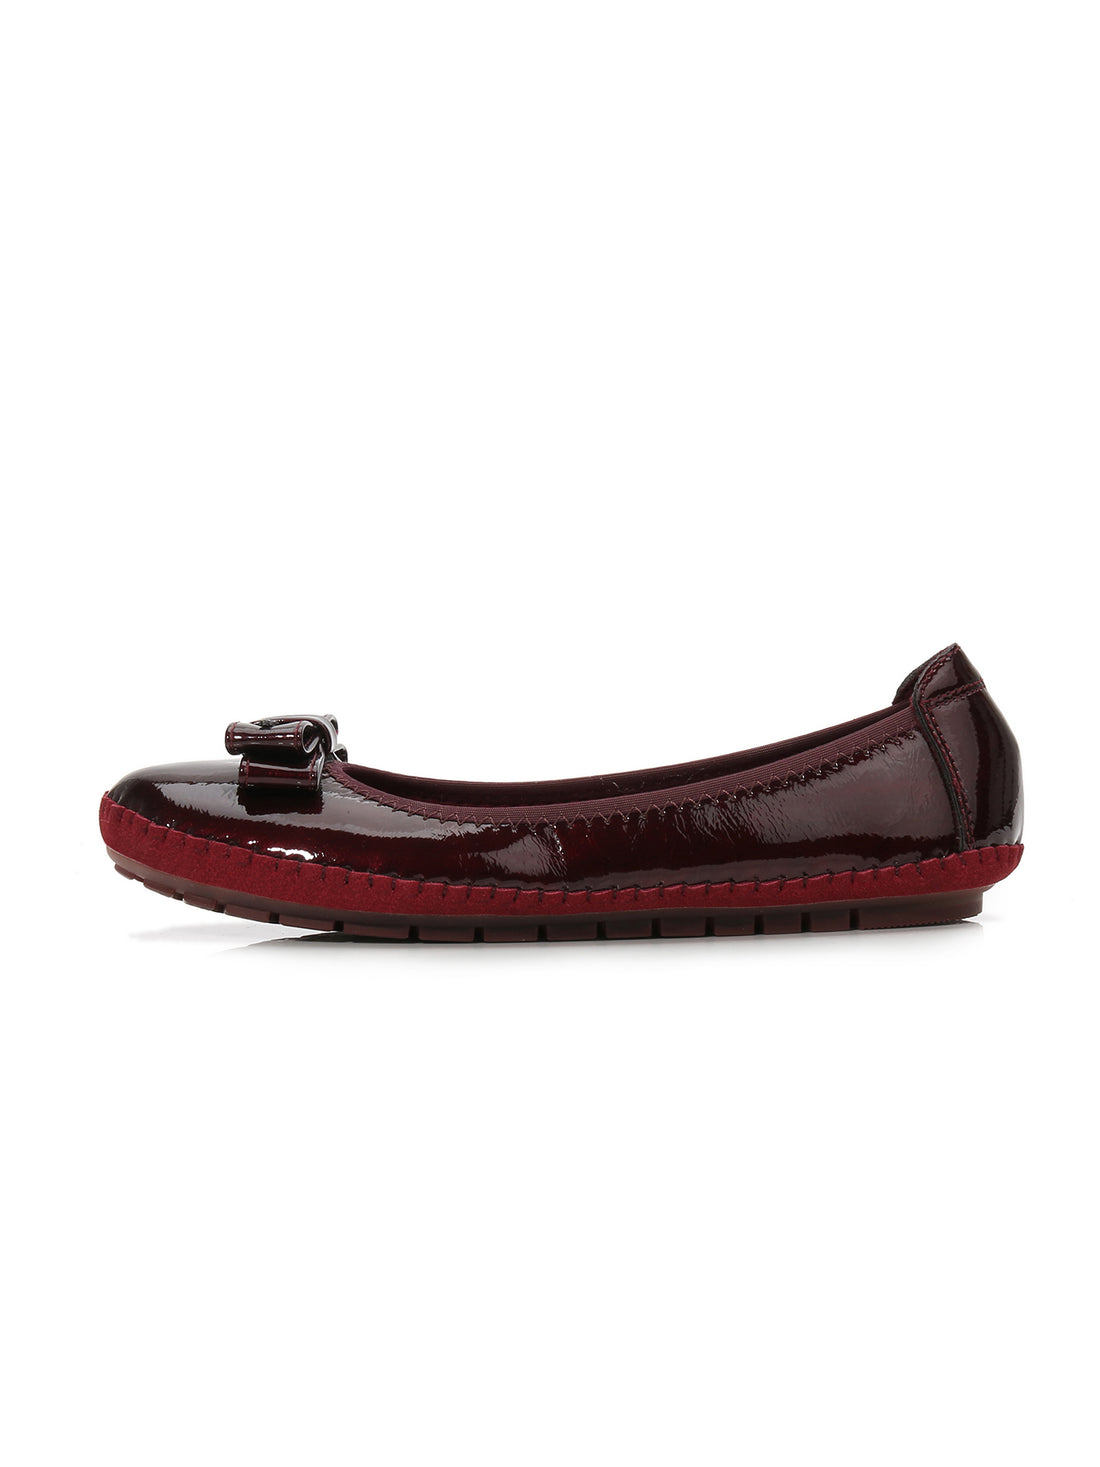 Larrie Red Simplicity Comfortable Ballerinas Flats L41901-WS01SV-2-RED